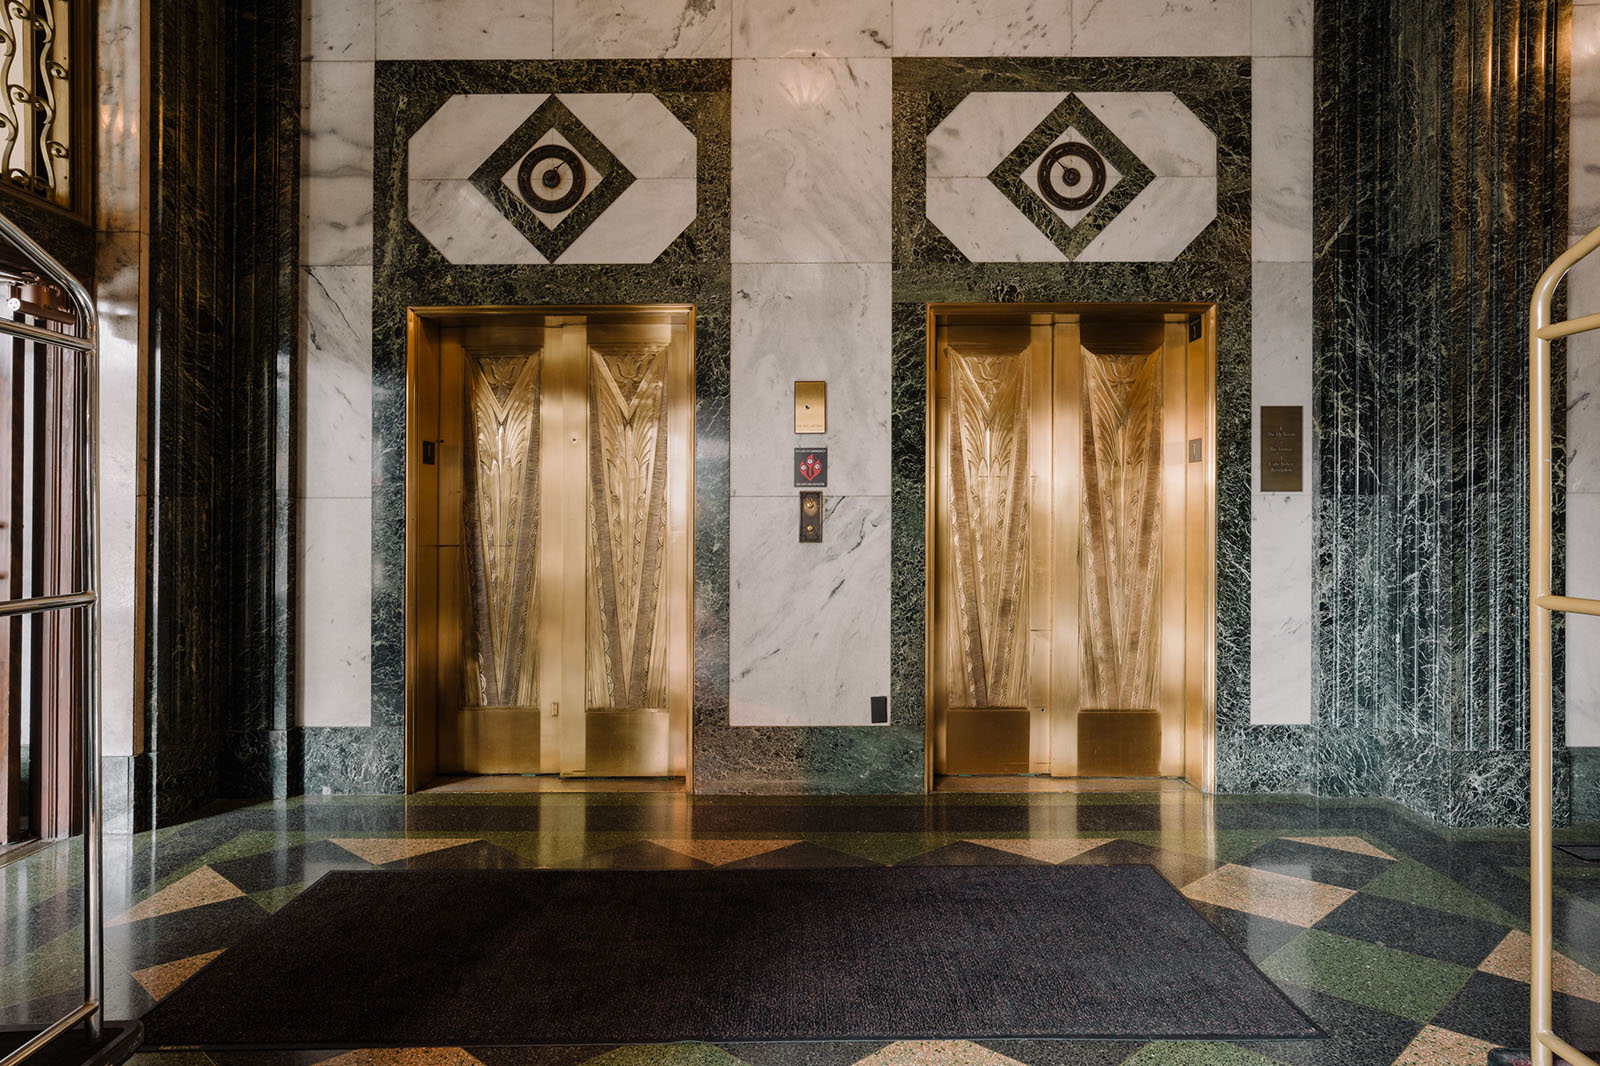 Lobby at The Robey, a designer hotel in Chicago